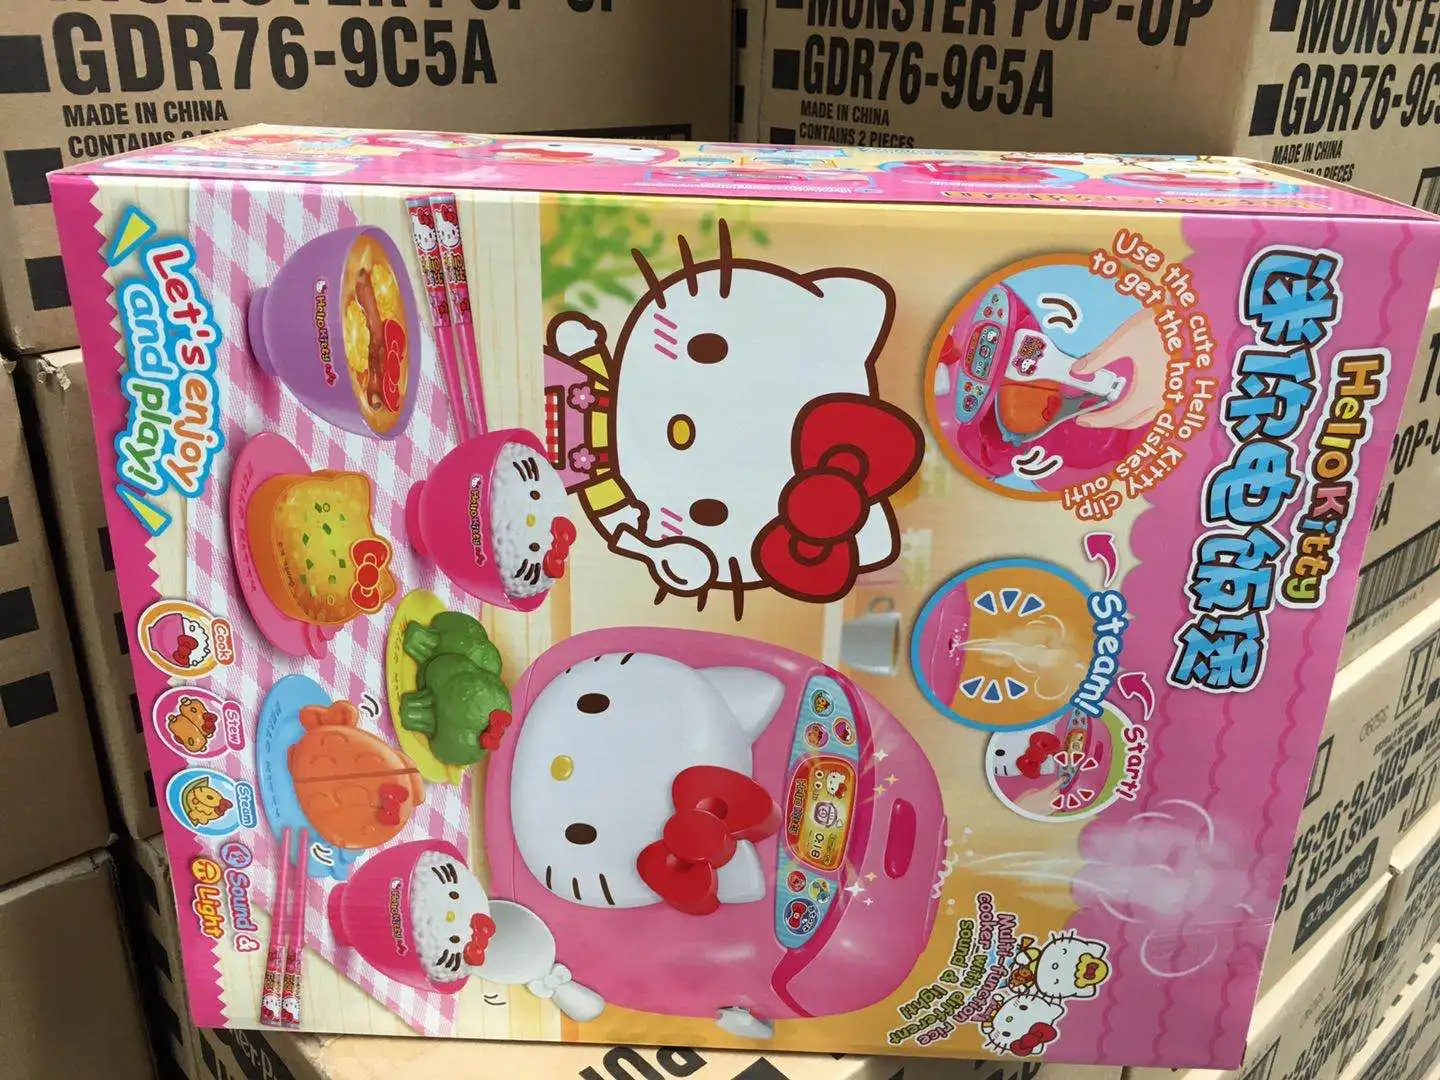 This Mini Hello Kitty Electric Cooker Includes Matching Pink Accessories